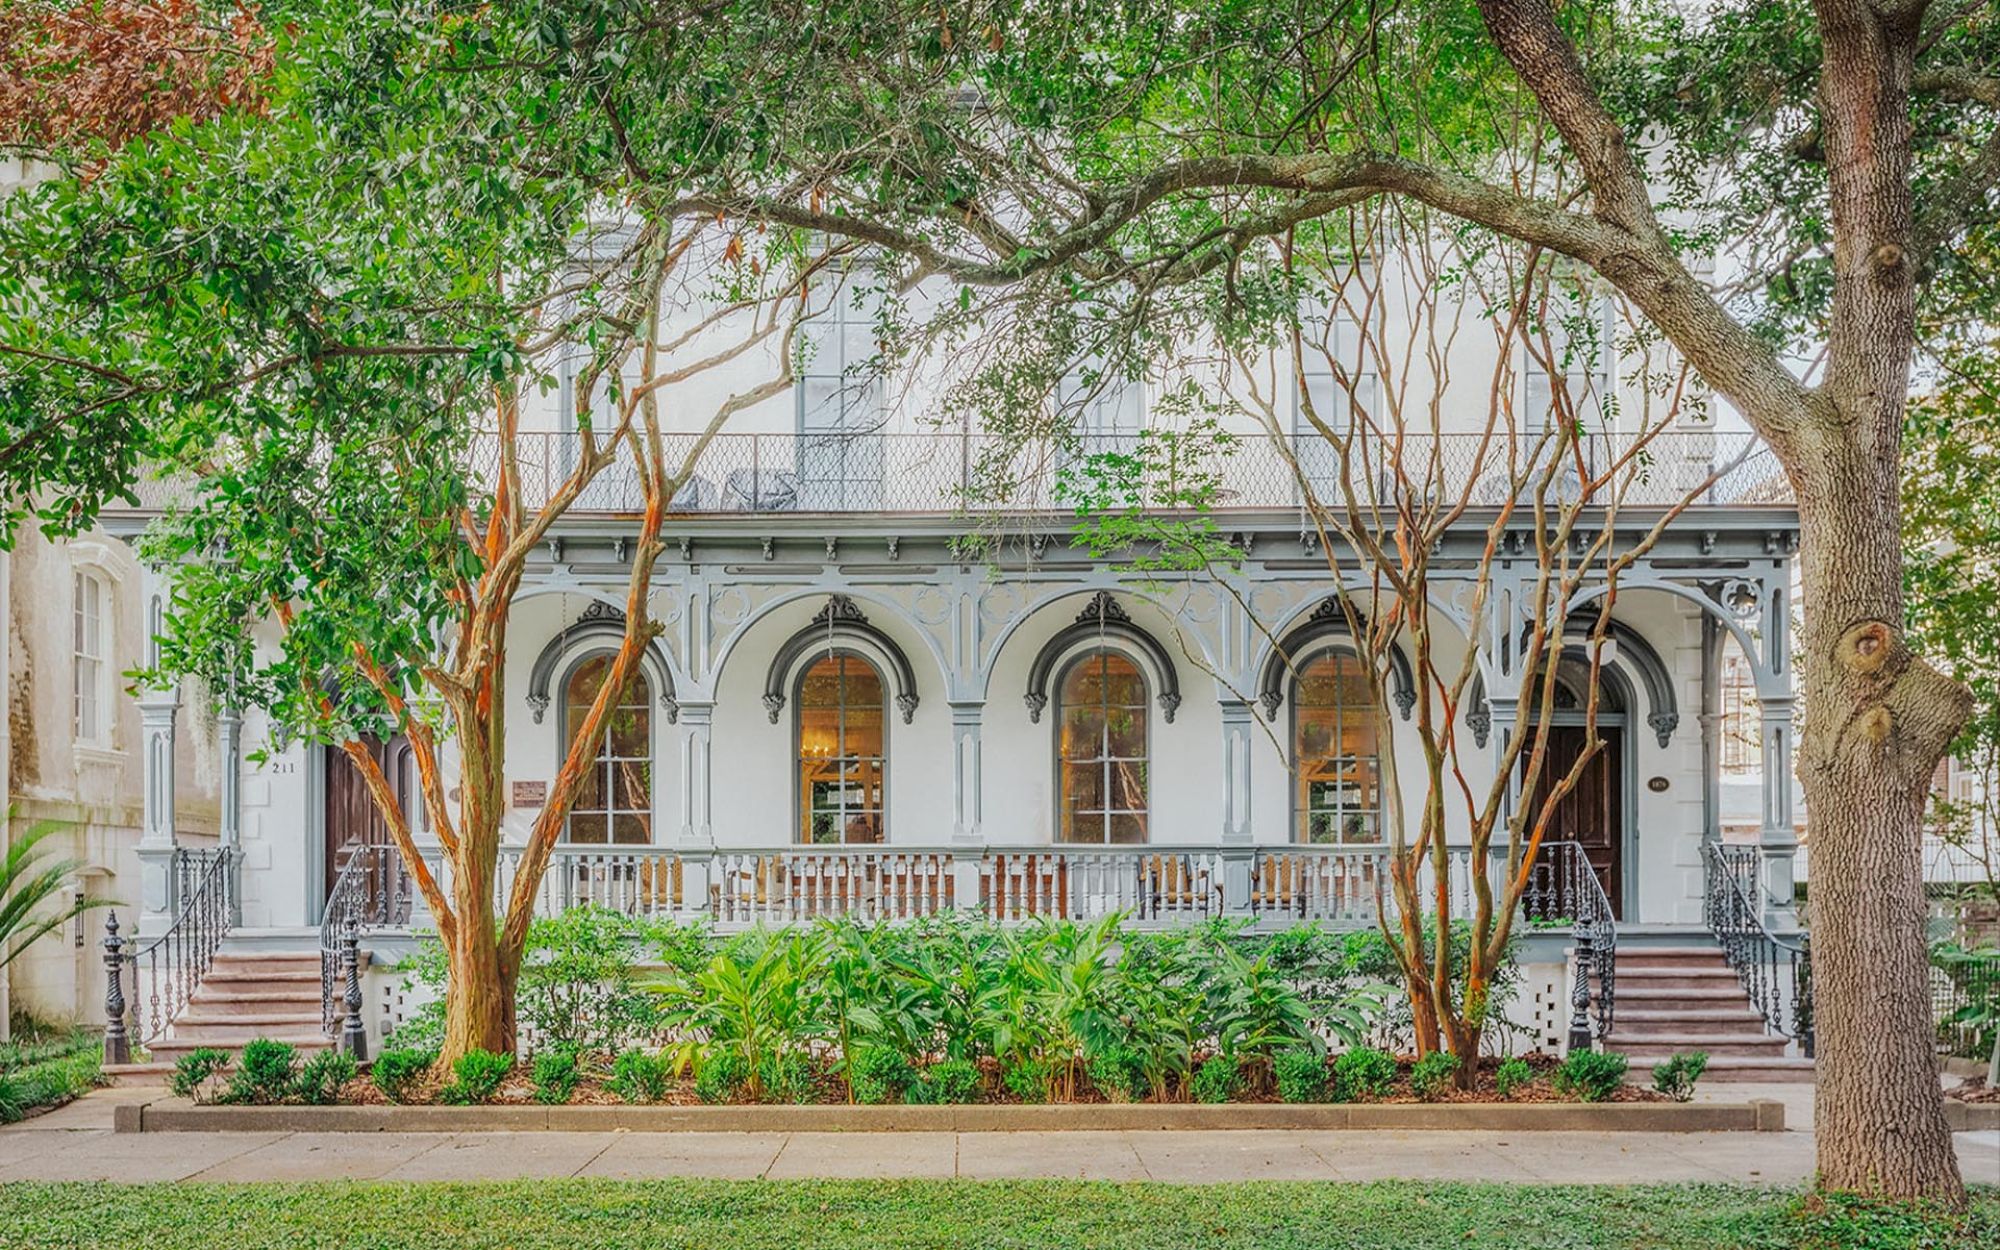 The image shows a charming two-story house with arched windows, a front porch, and lush greenery in the yard. Trees frame the view beautifully.